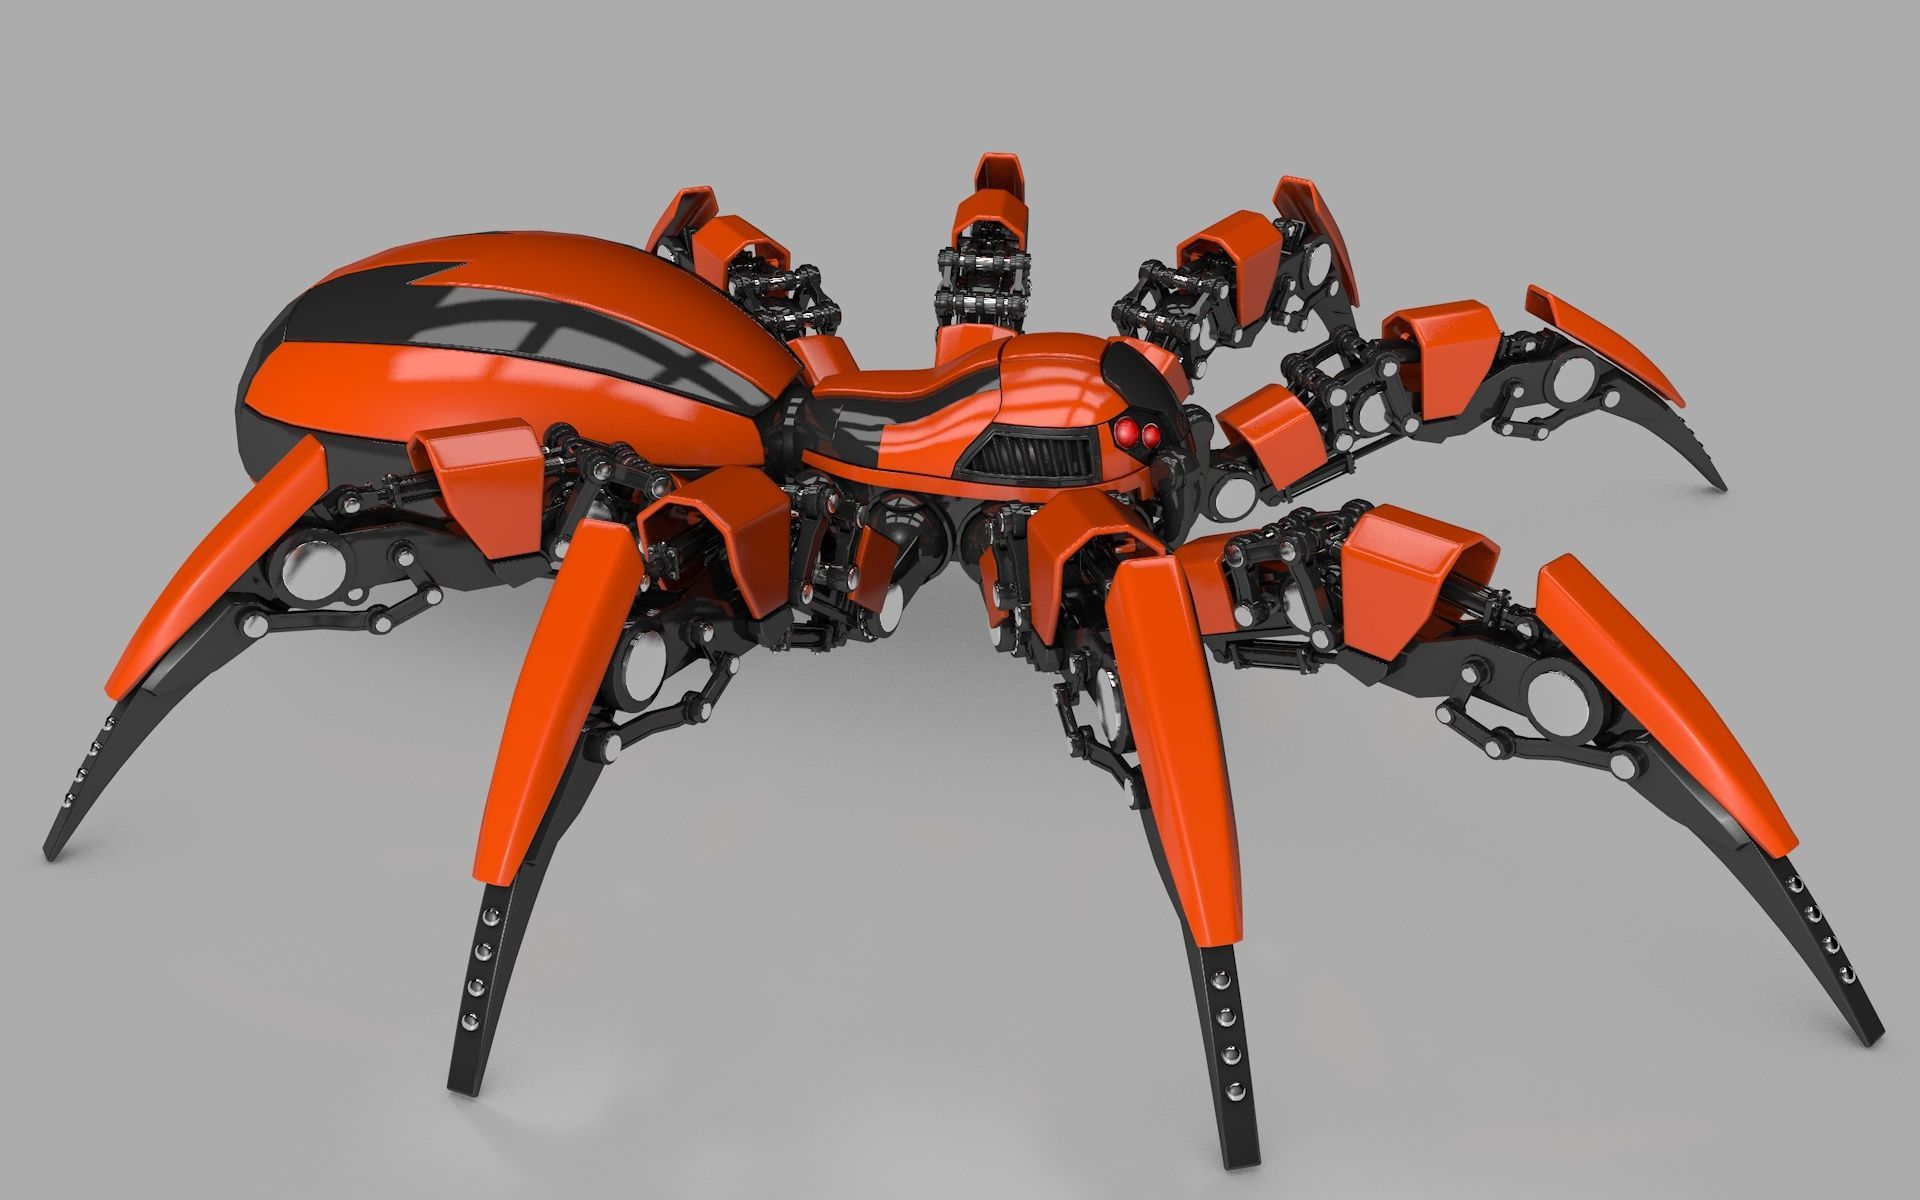 Amazing Wallpaper For PC Group. Spider robot, Robot wallpaper, Technology wallpaper